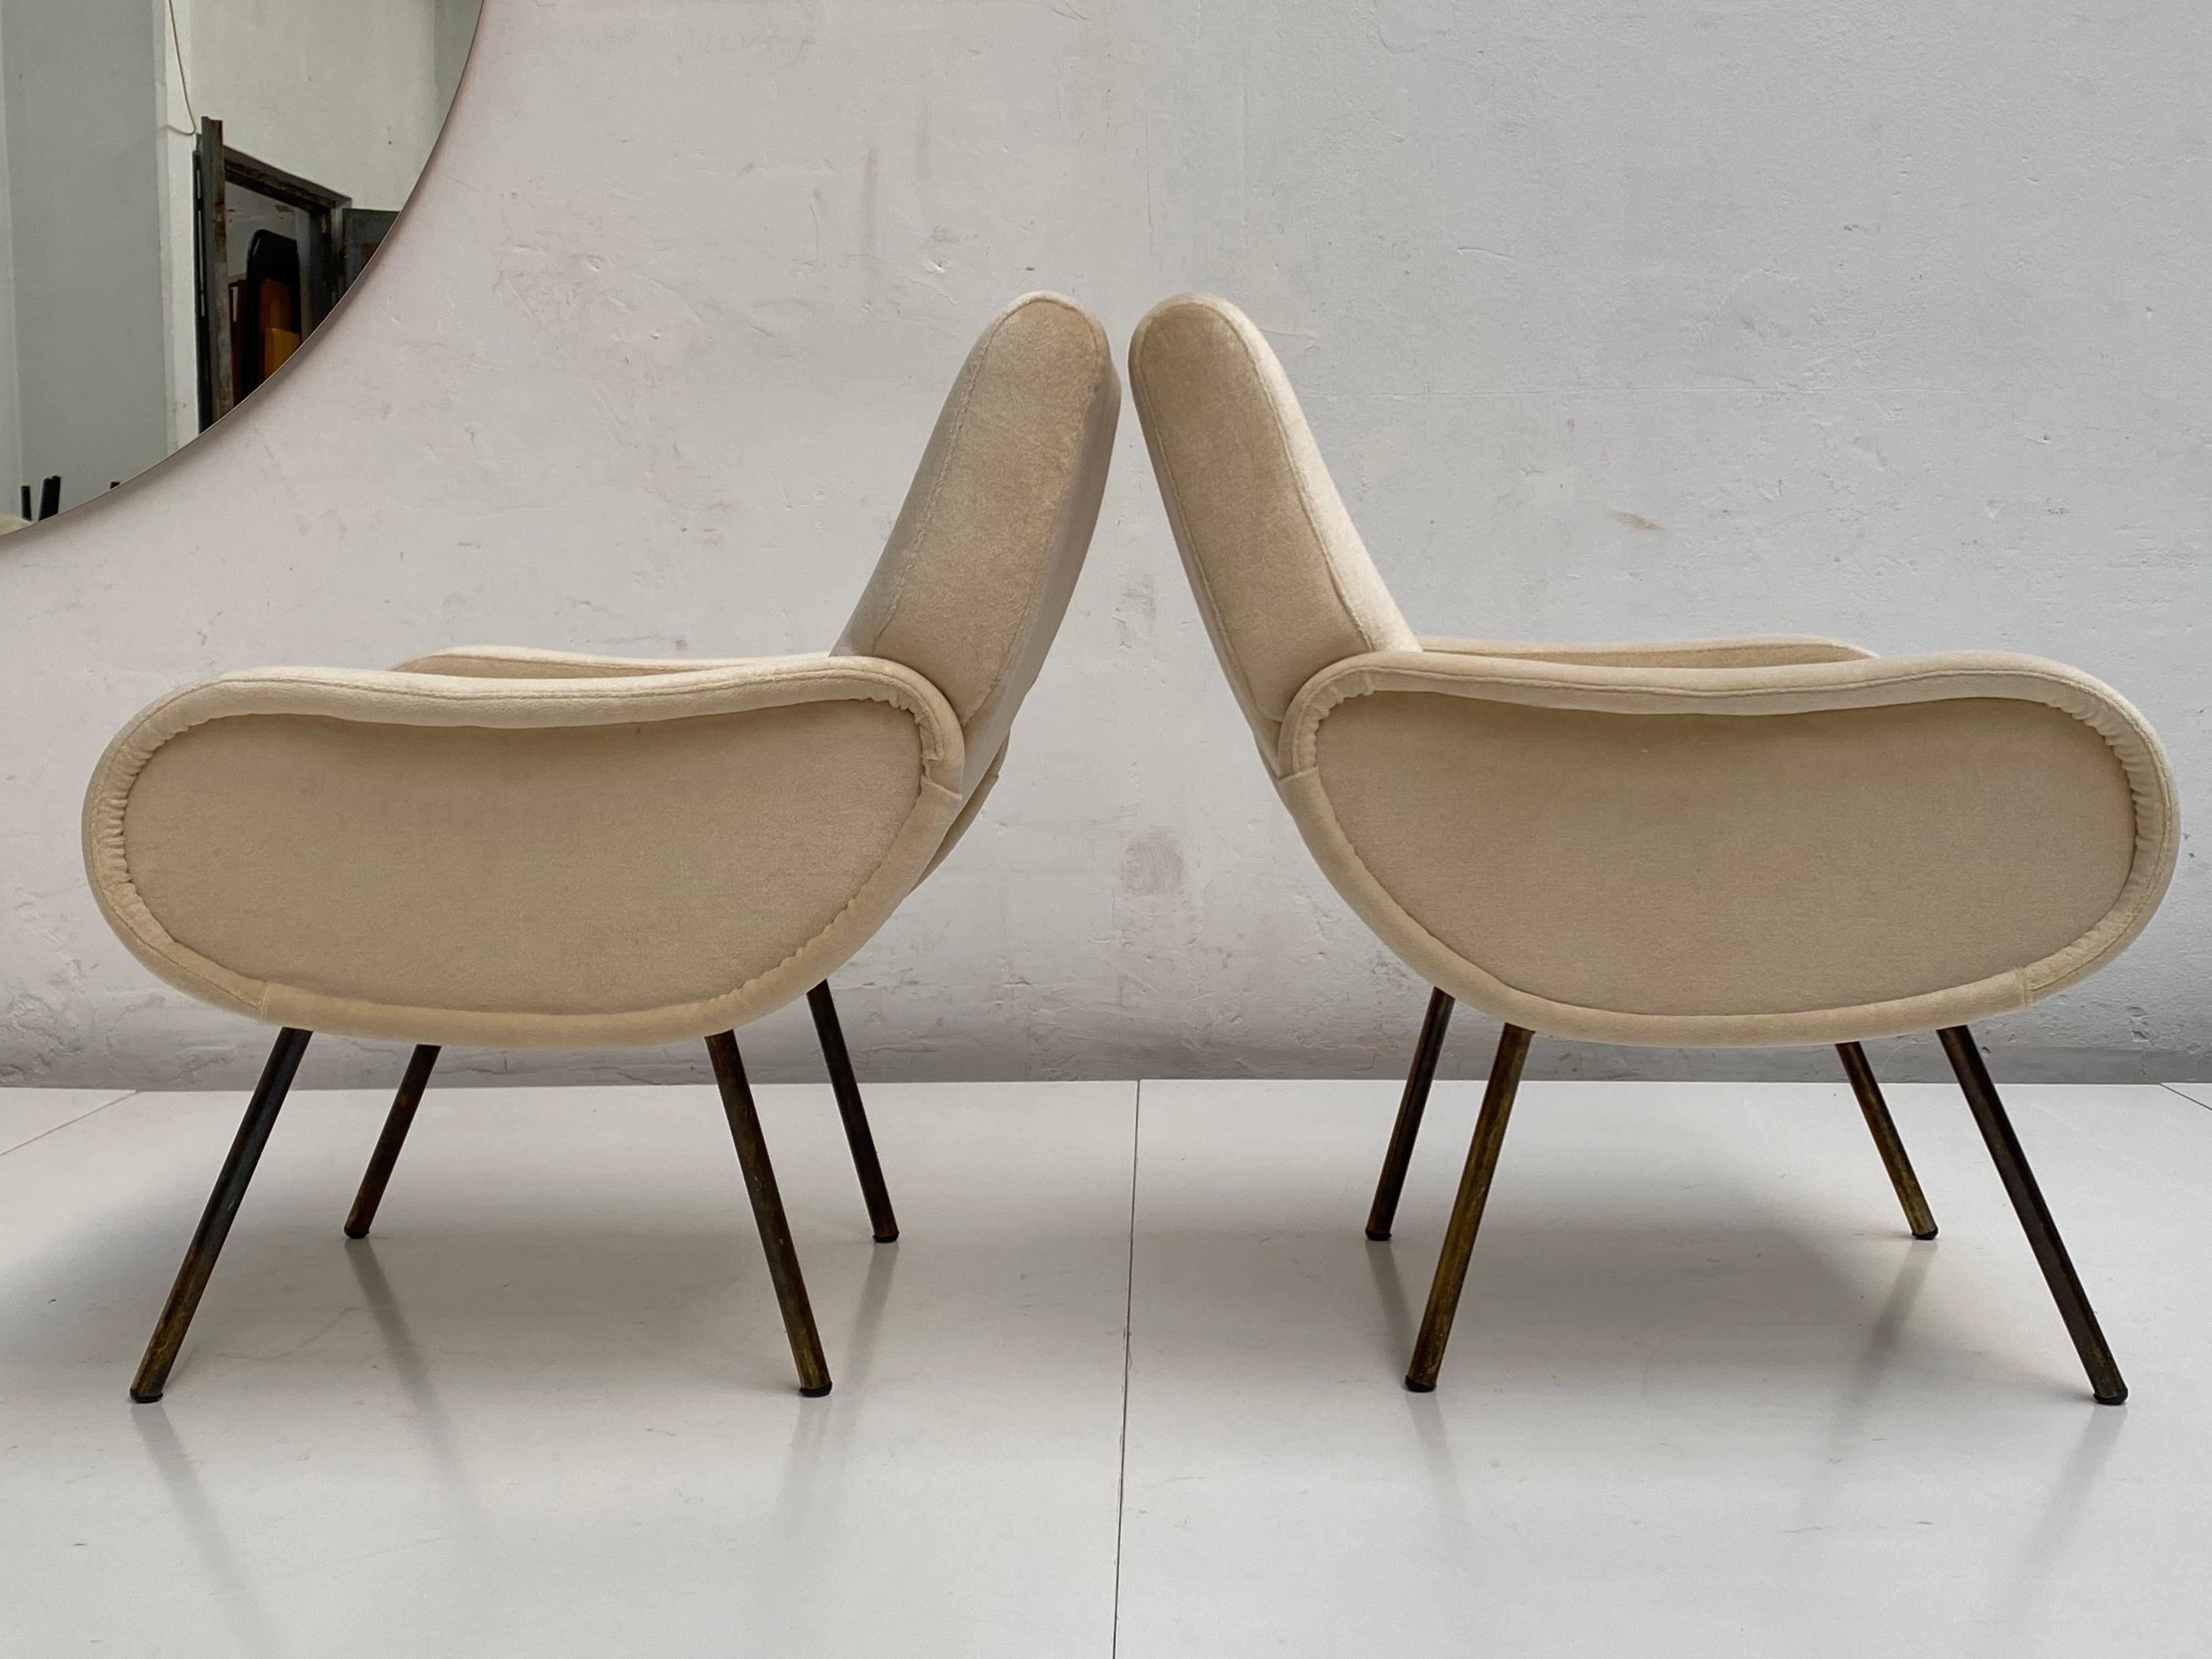 Zanuso Mohair 'Baby' Lounge Chairs, Early Wood Frames, Brass Legs, Arflex, 1951 For Sale 5